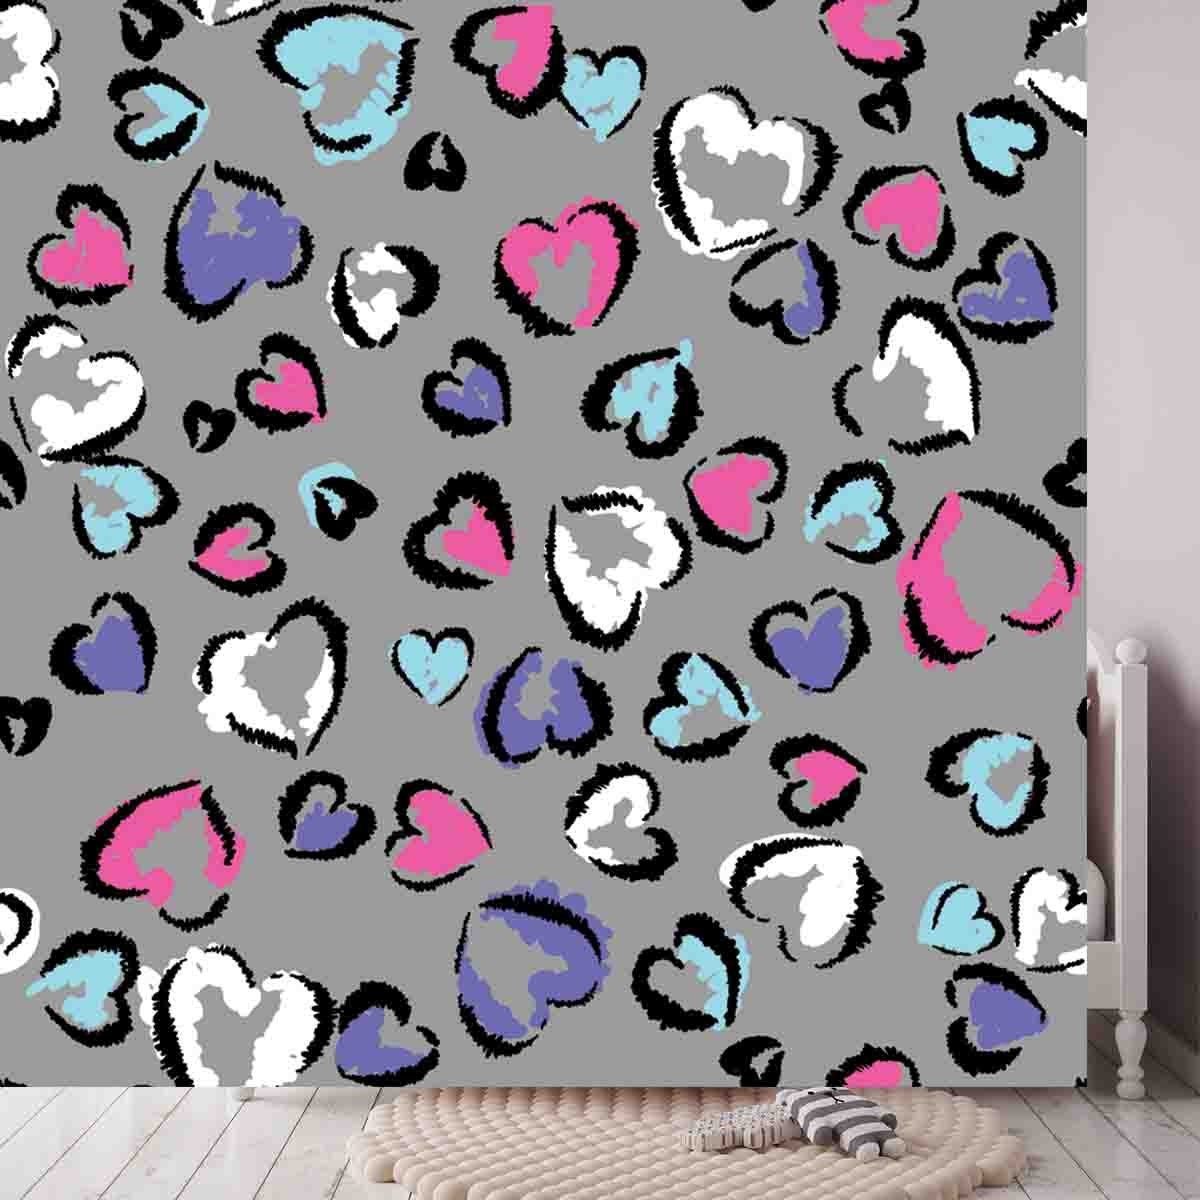 Abstract Seamless Chaotic Leopard Print with Hearts Elements Wallpaper Girls Bedroom Mural